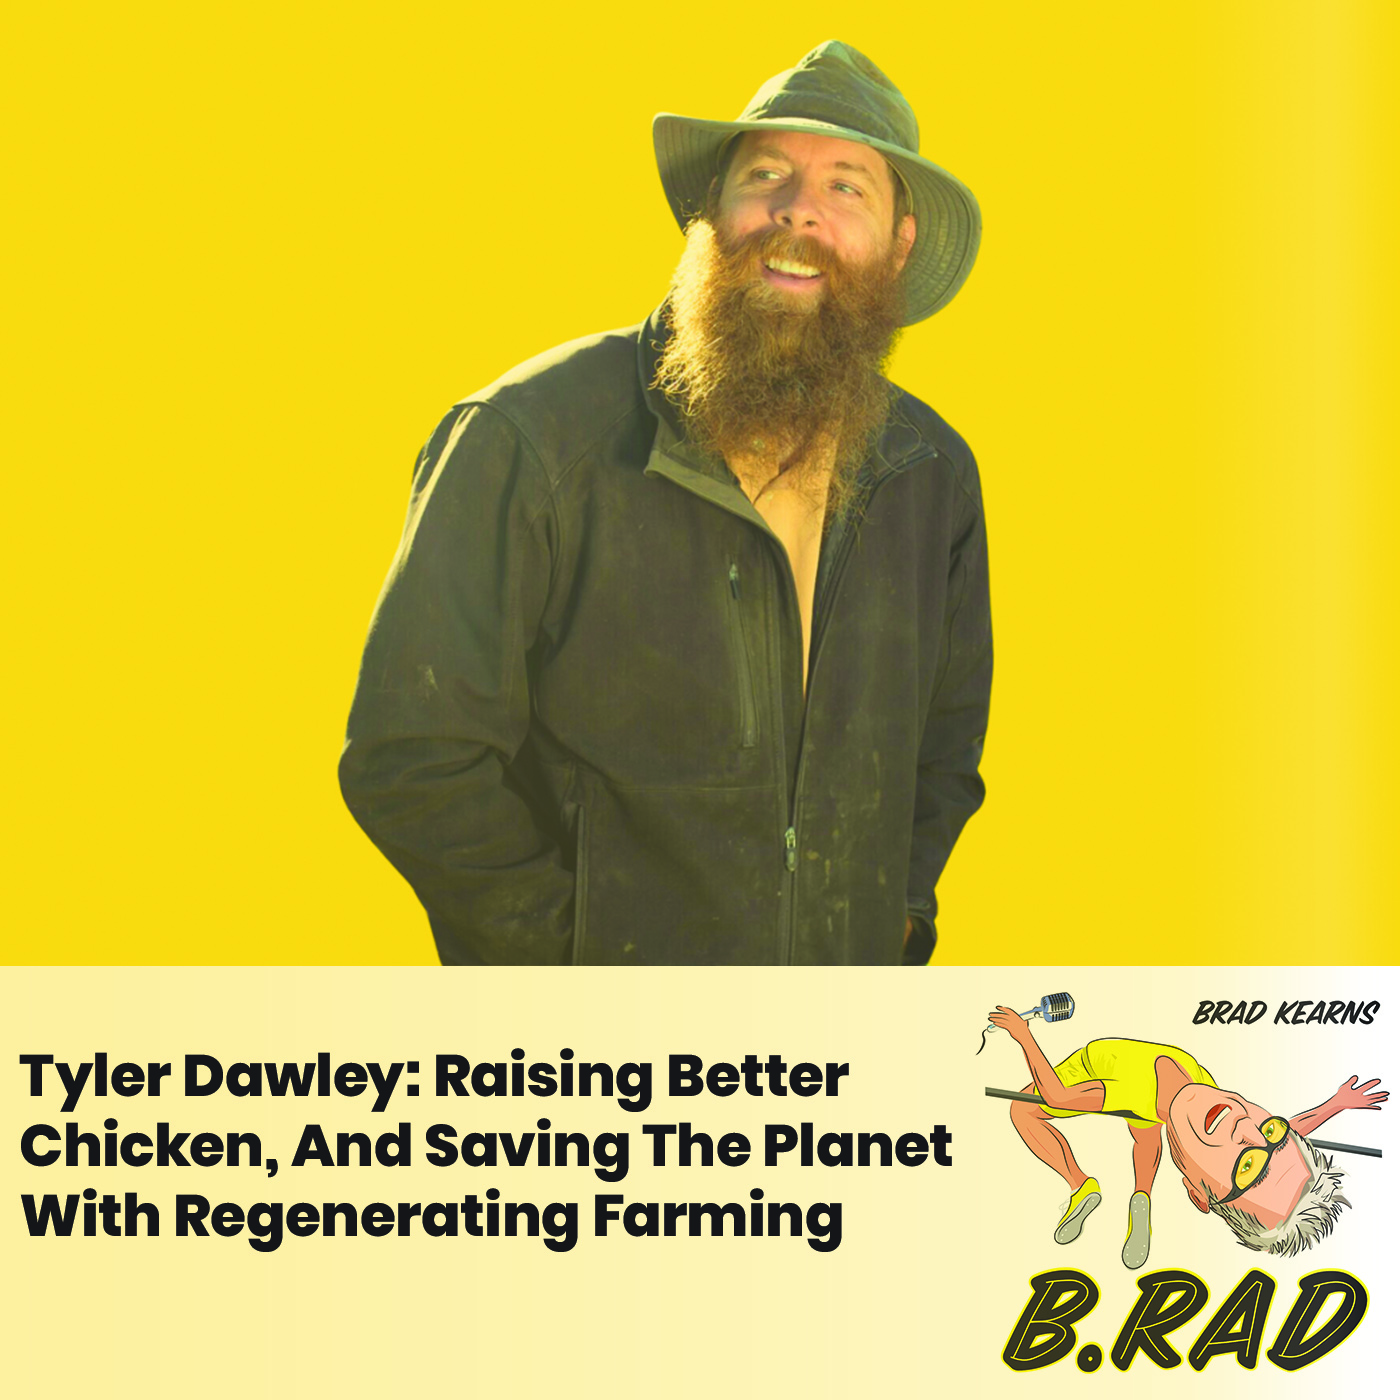 Tyler Dawley: Raising Better Chicken, And Saving The Planet With Regenerative Farming